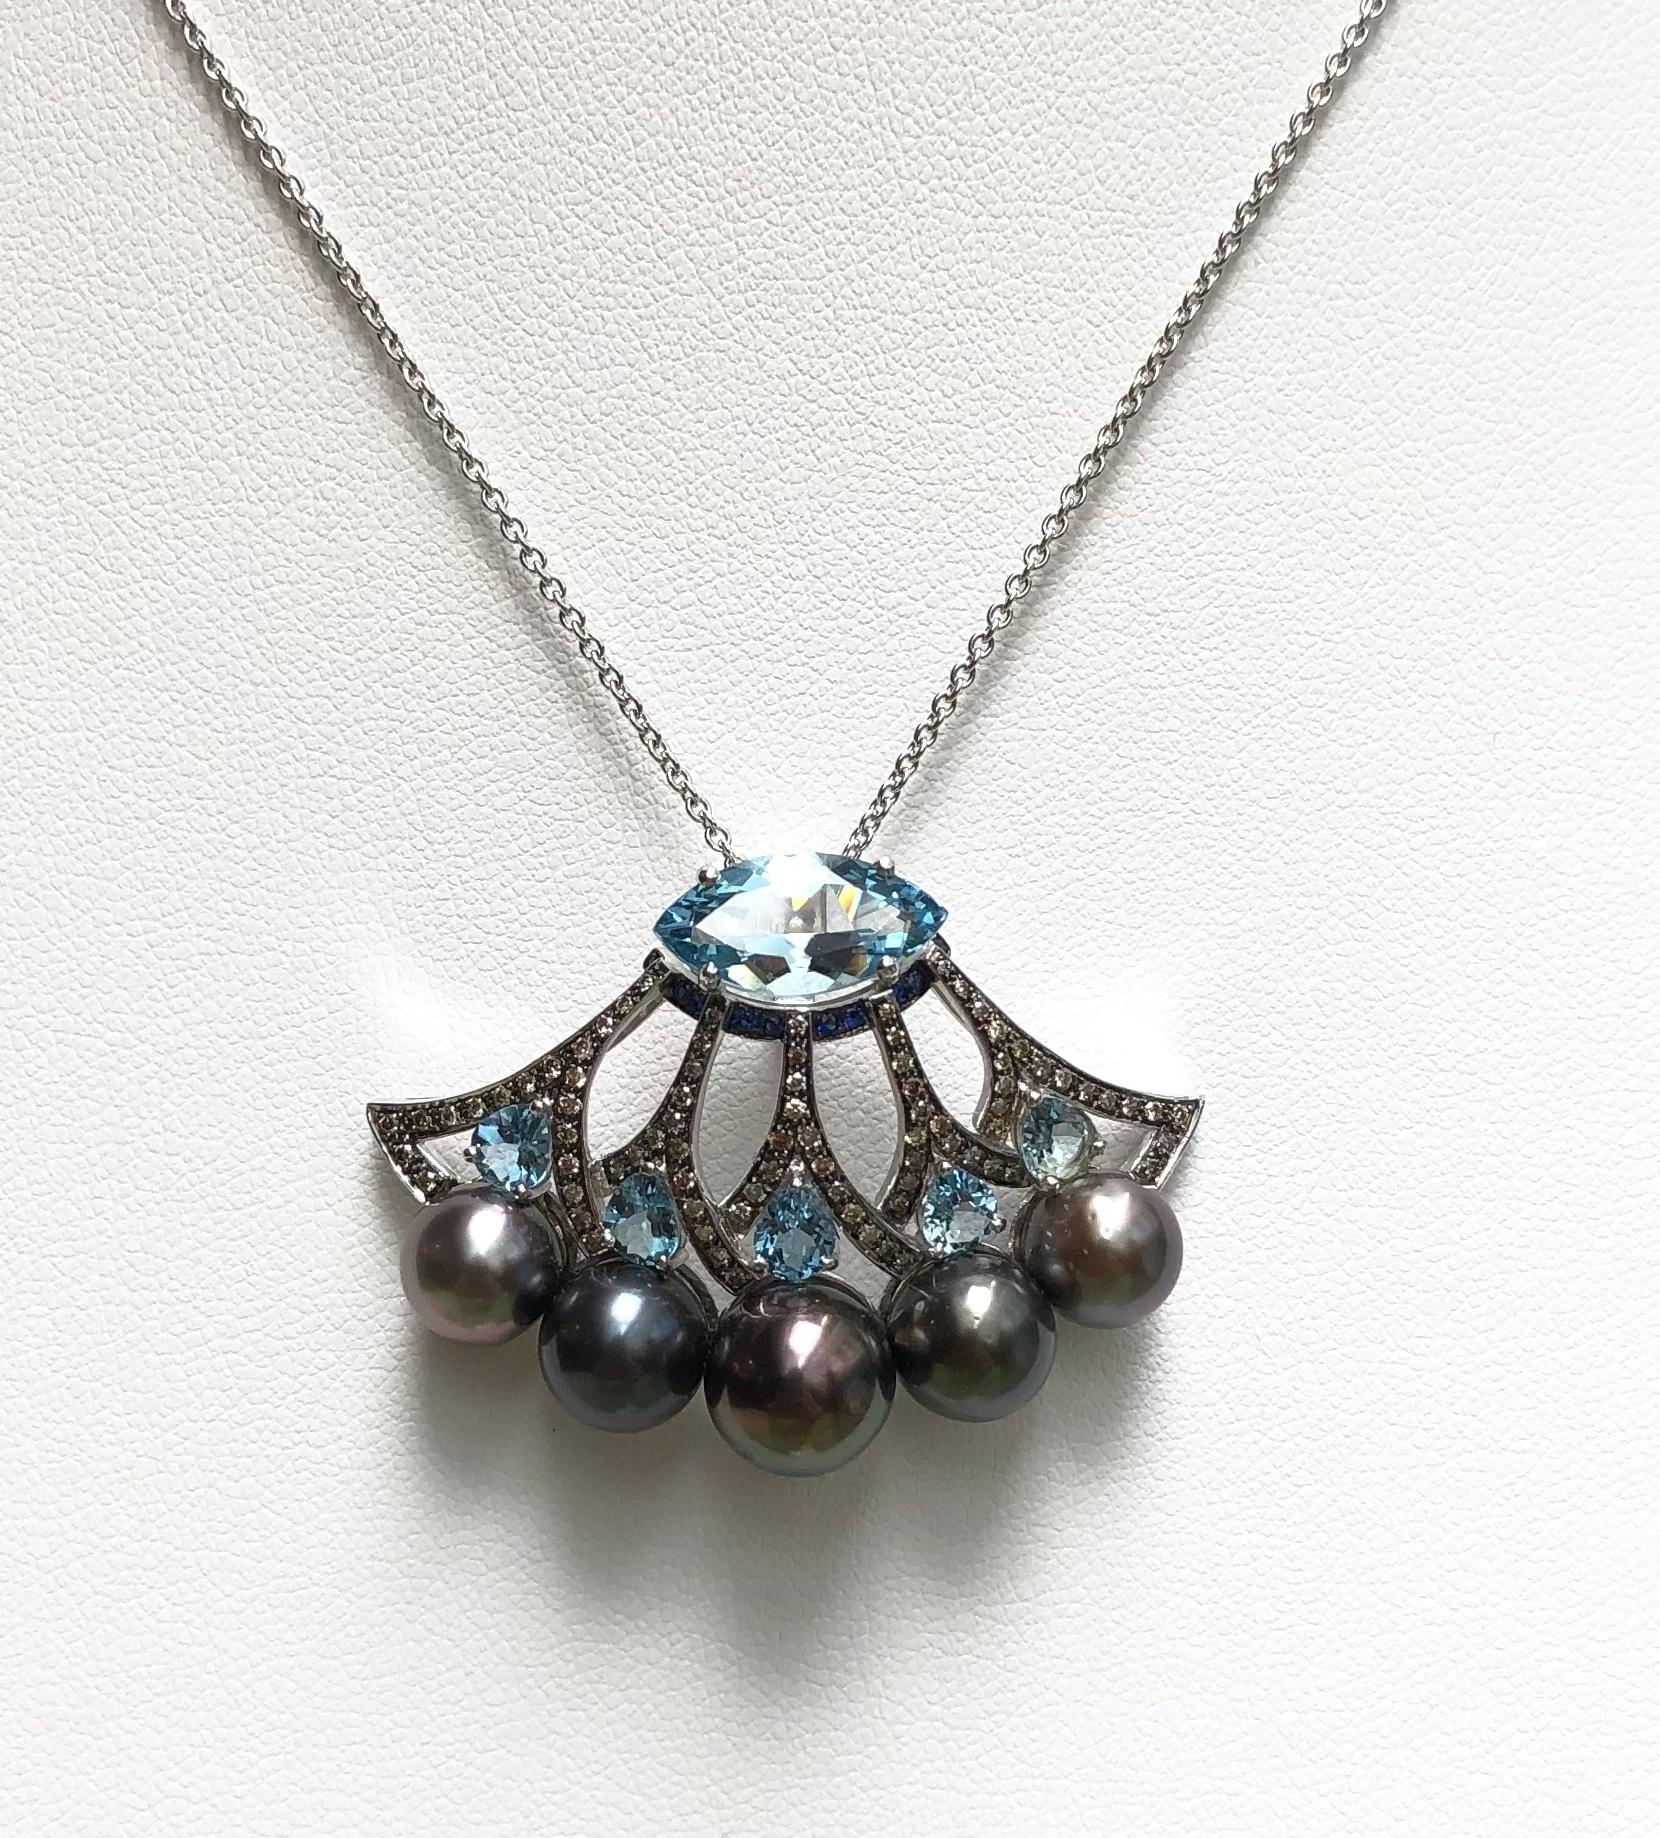 Tahitian Pearl, Aquamarine 3.50 carats, Blue Sapphire 0.06 carat and Brown Diamond 0.38 carat Pendant set in 18 Karat White Gold Settings
(chain not included)

Width: 4.8 cm 
Length: 3.0 cm
Total Weight: 12.23grams

